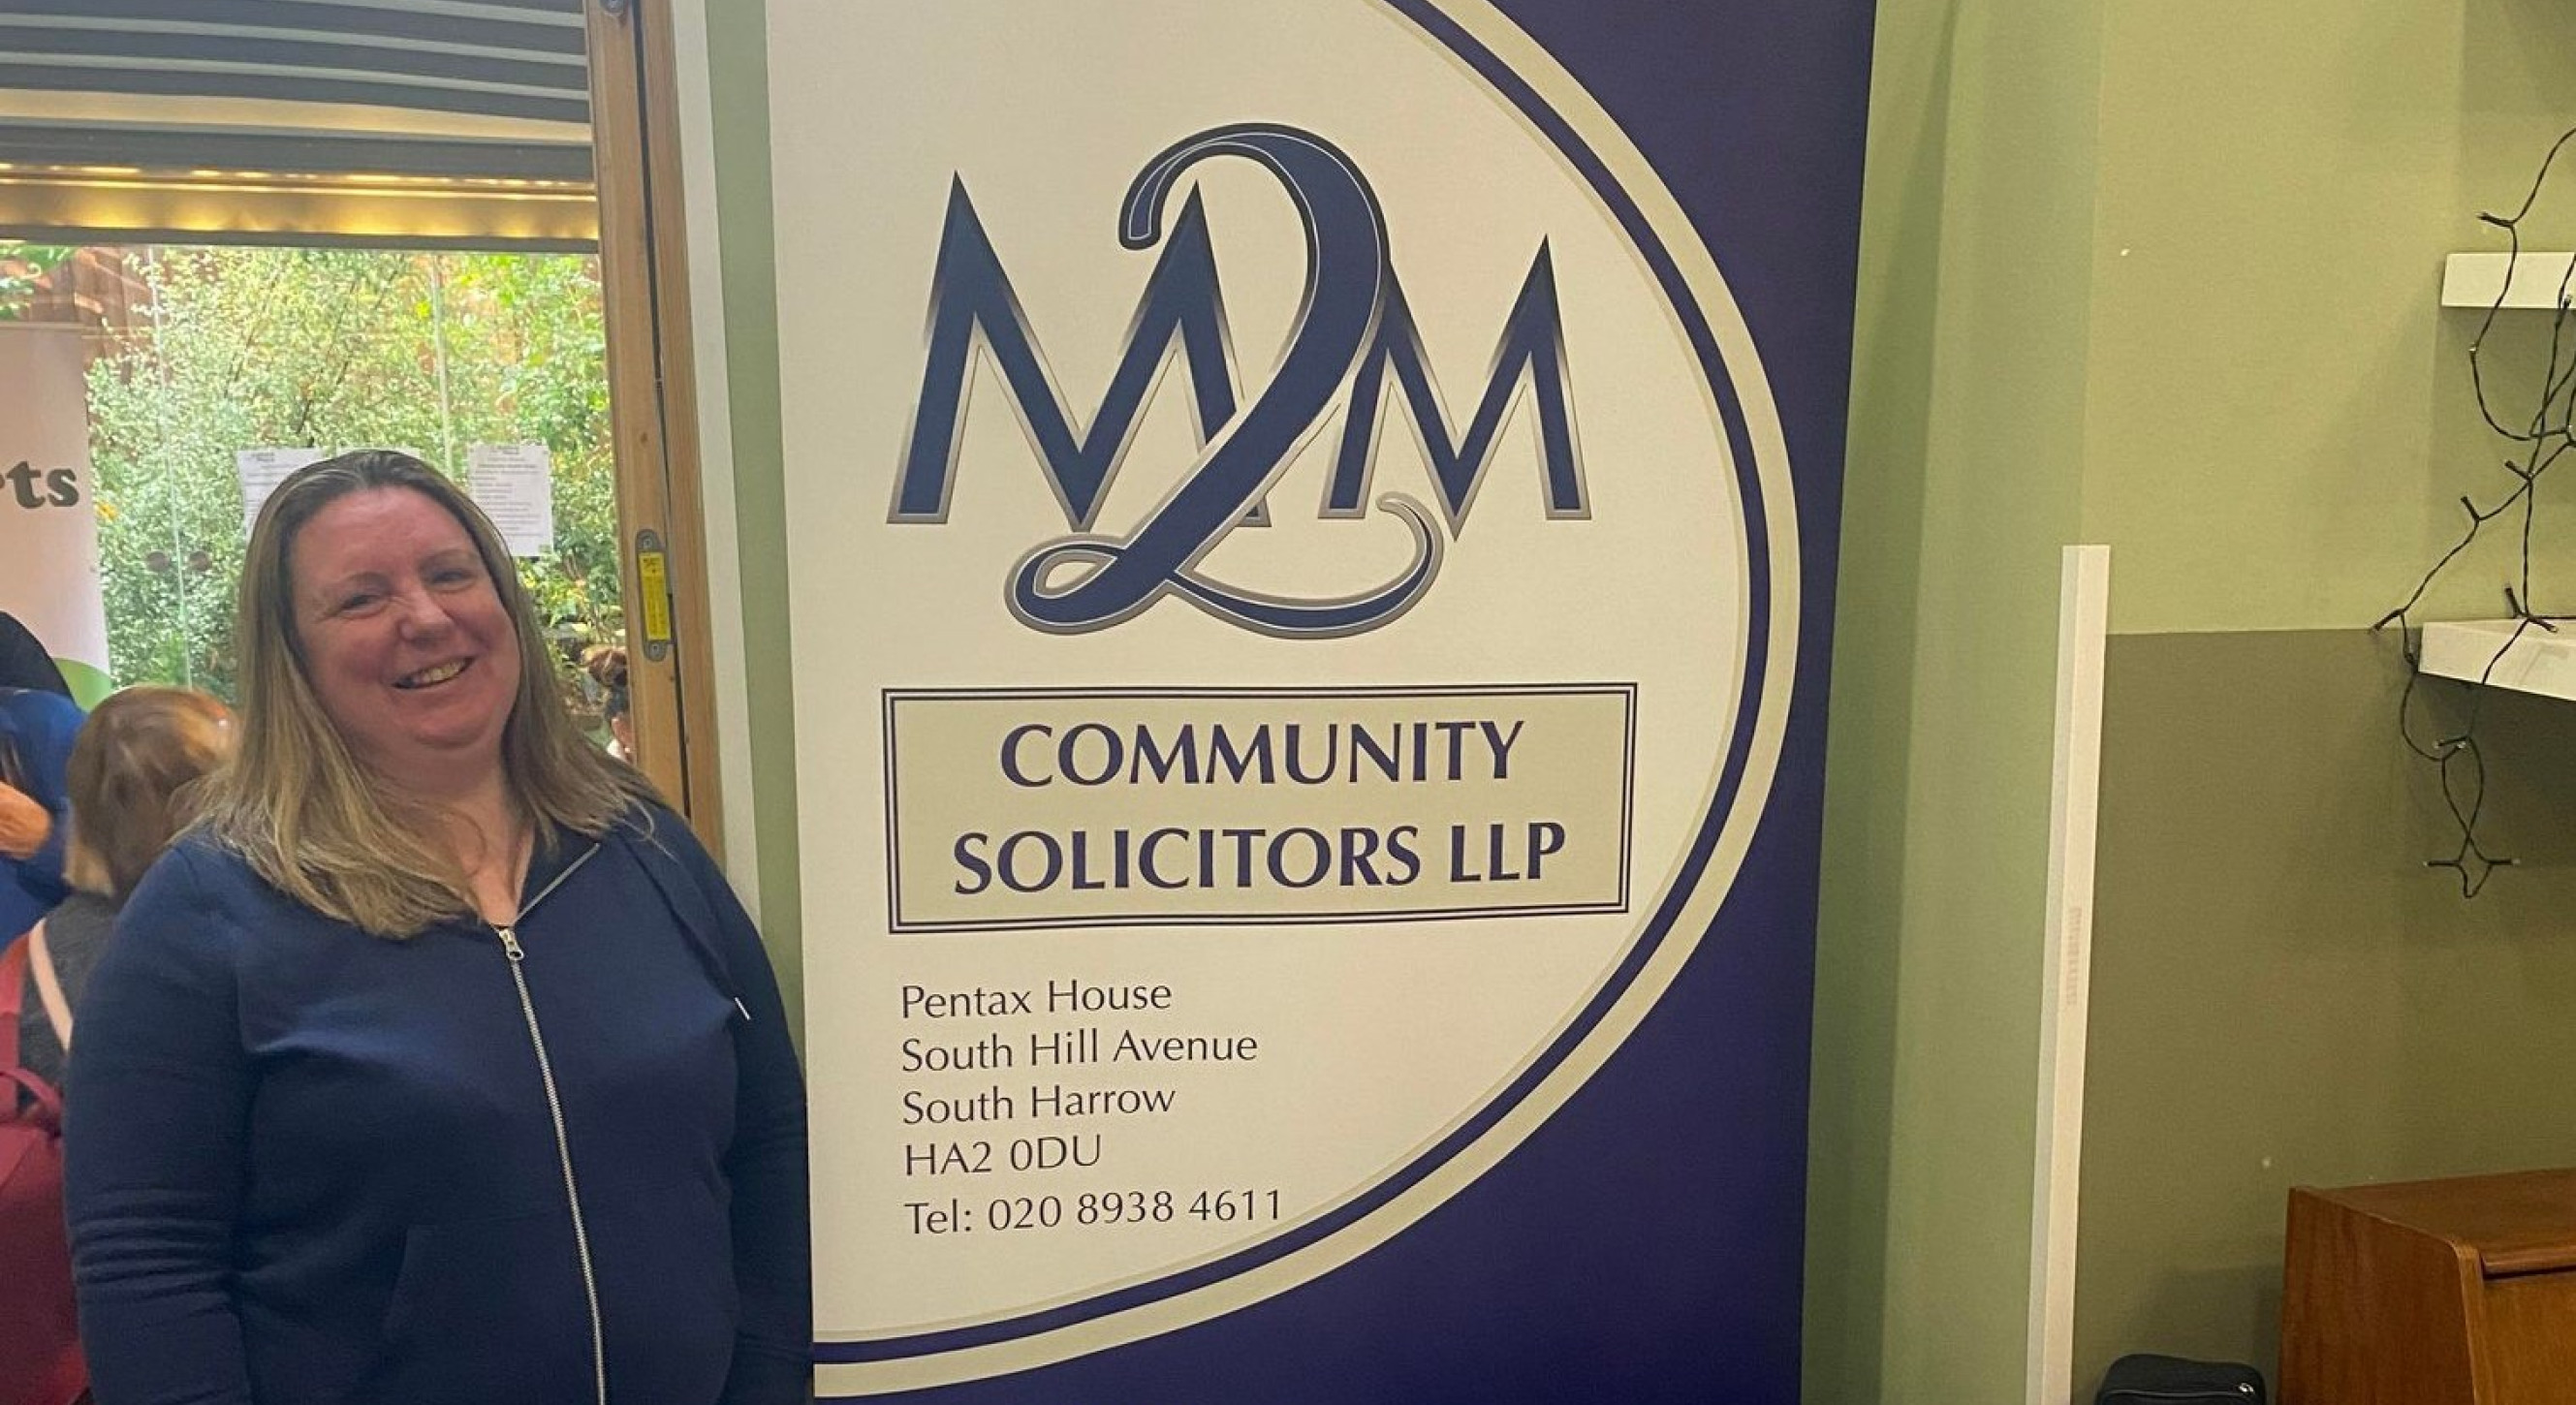 Marie from M2M solicitors